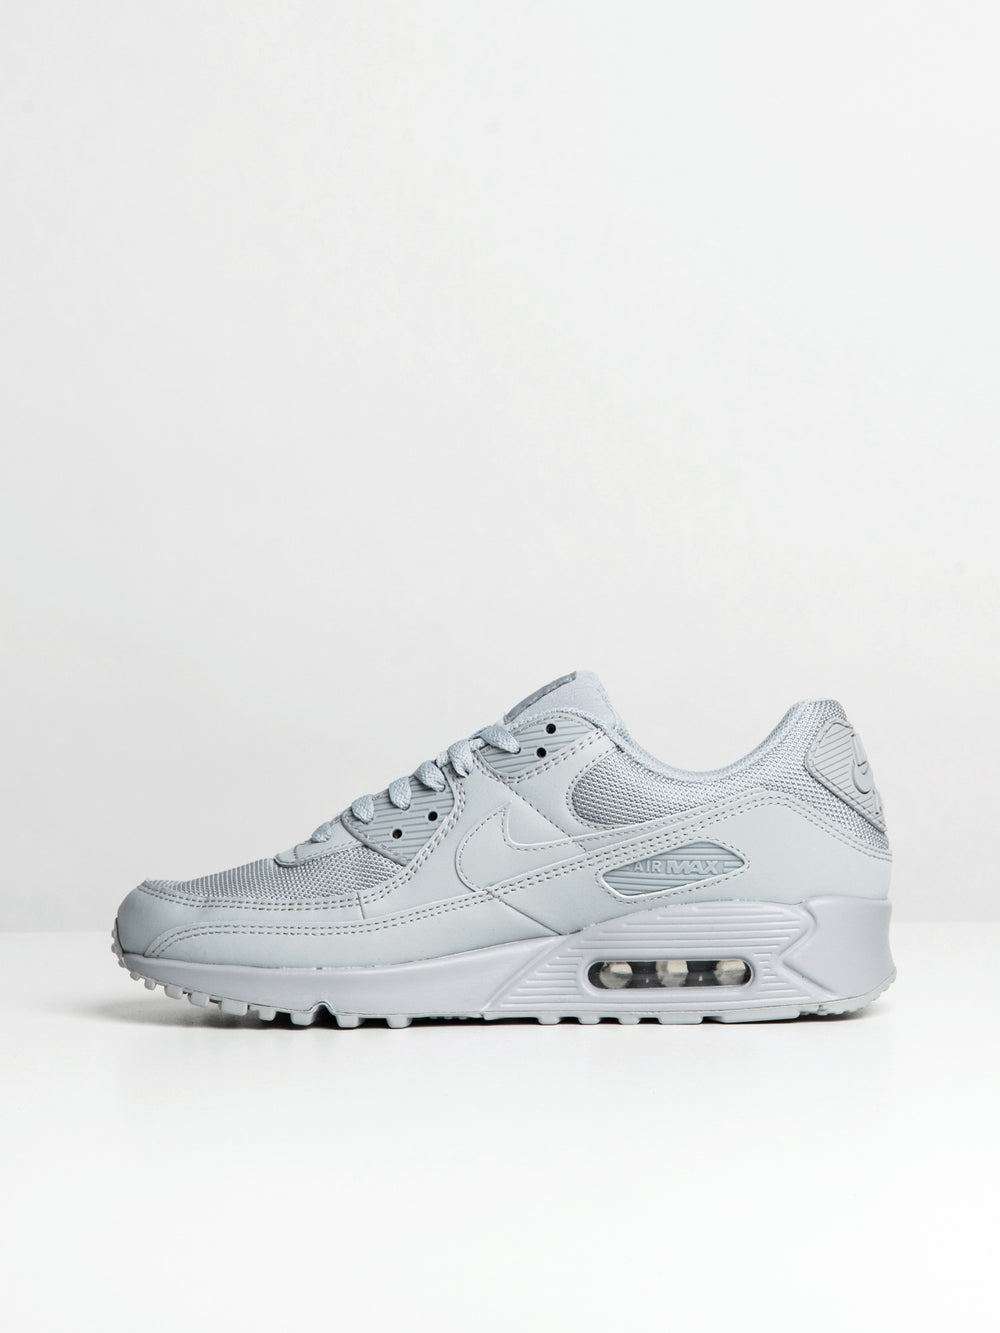 CHAUSSURES AIR MAX 90 POUR HOMME